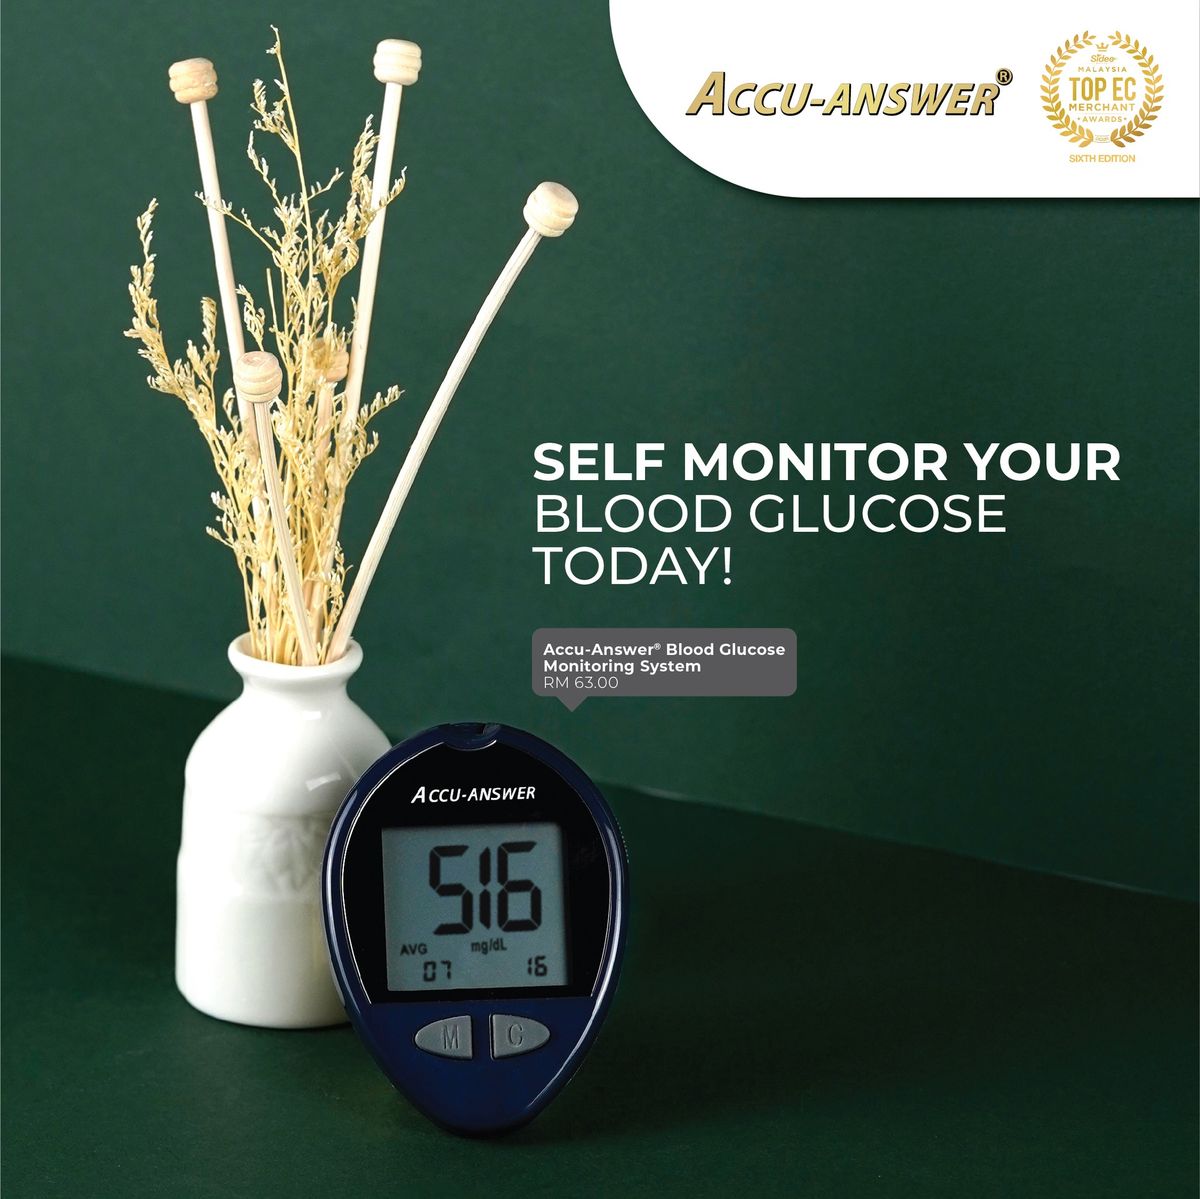 Isn't it easier to self monitor your health at your own comfort?